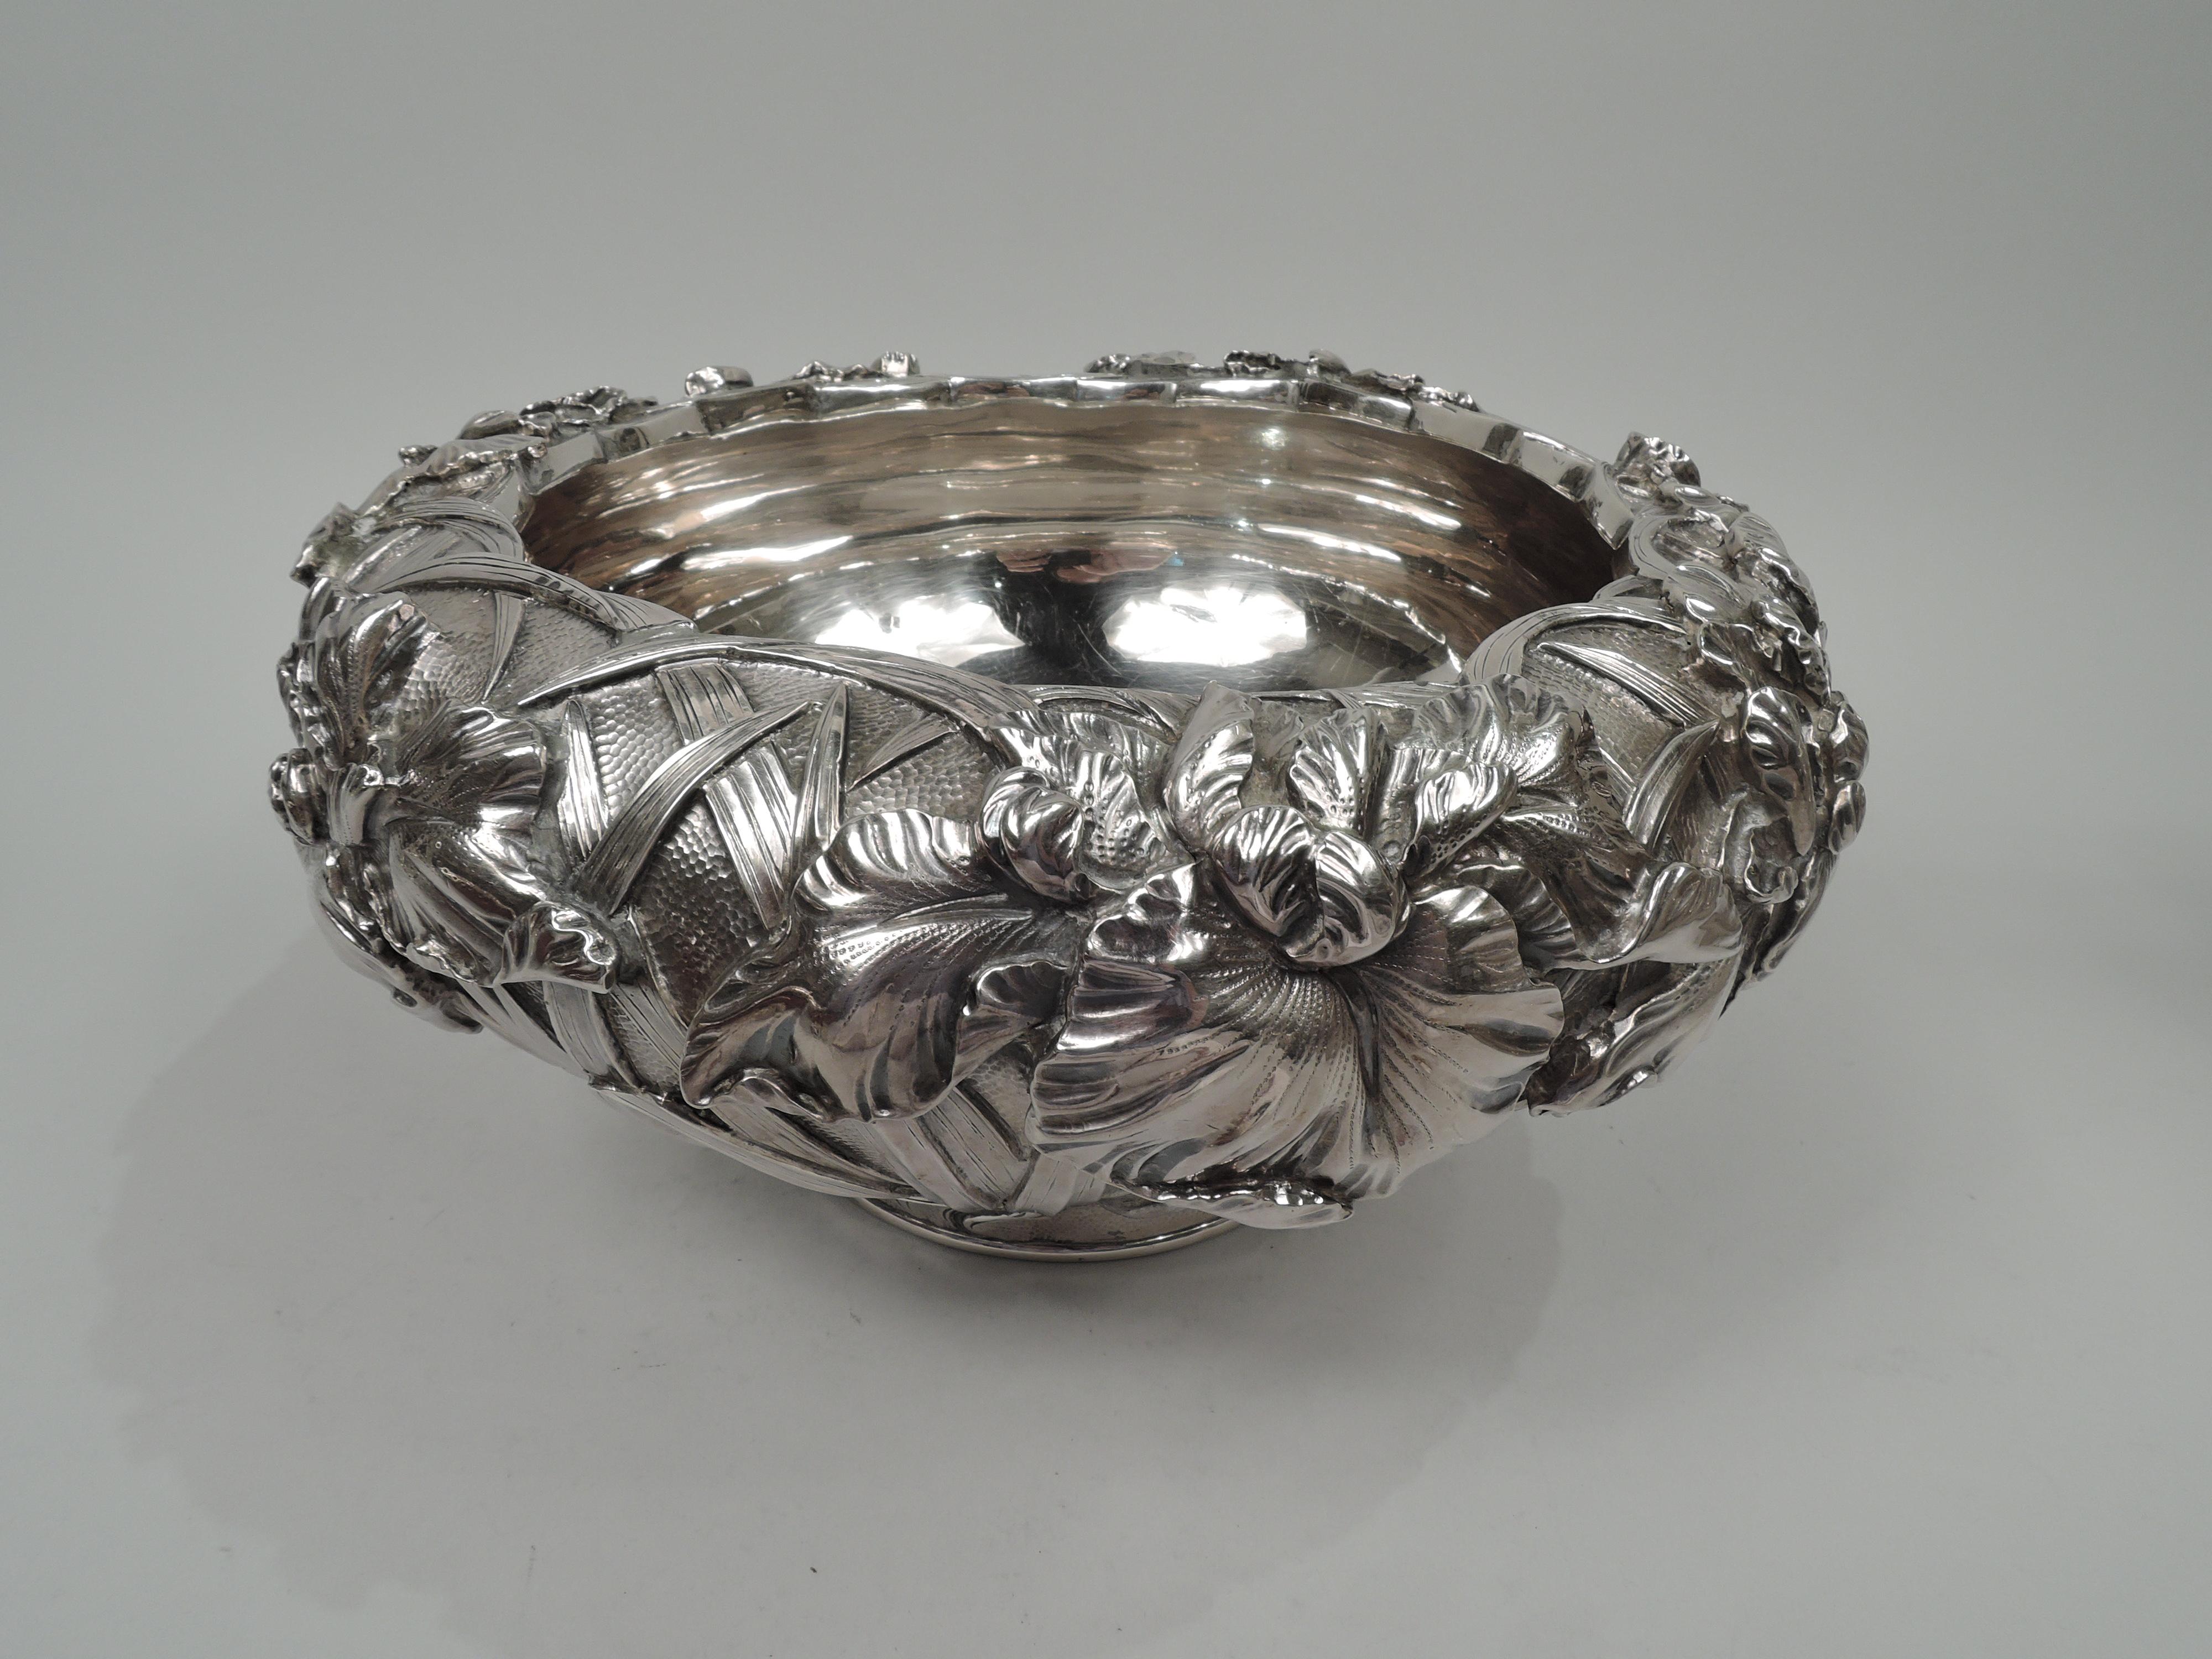 Turn-of-the-century Japanese silver bowl. Tapering sides on short inset foot. Sides have high-relief iris flowers with loose and splayed tendrils, and swaying tendrils and stems in eddying water. Fluid and tactile period motif on spot hammered